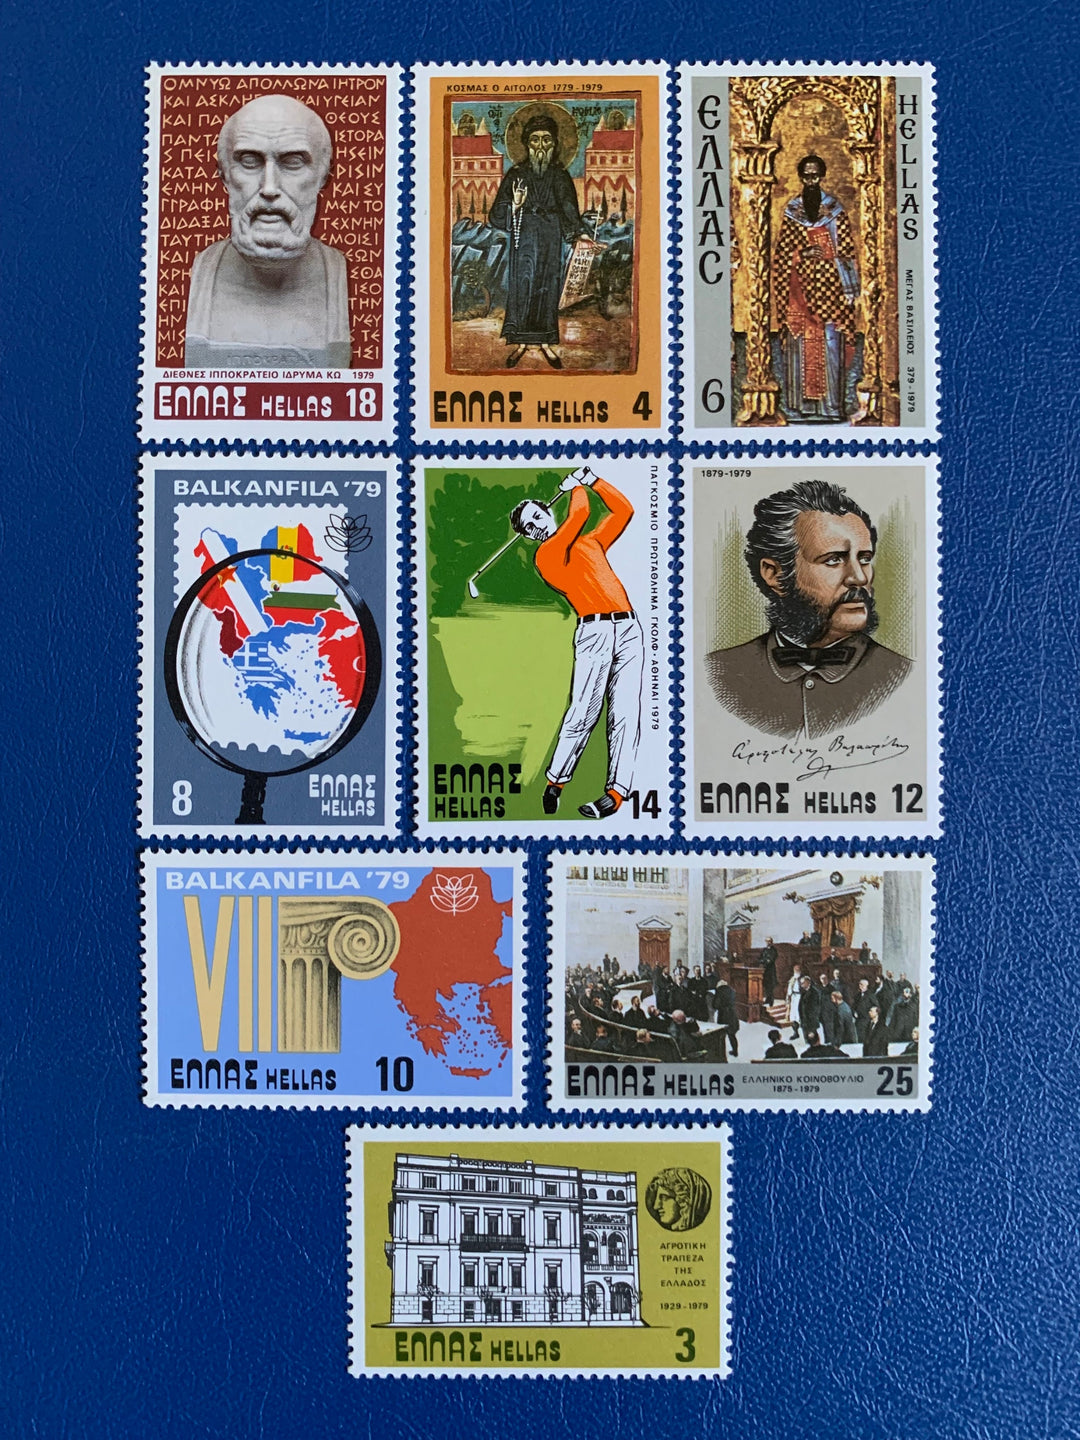 Greece - Original Vintage Postage Stamps- 1979 - Events & Anniversaries - for the collector, artist or collector